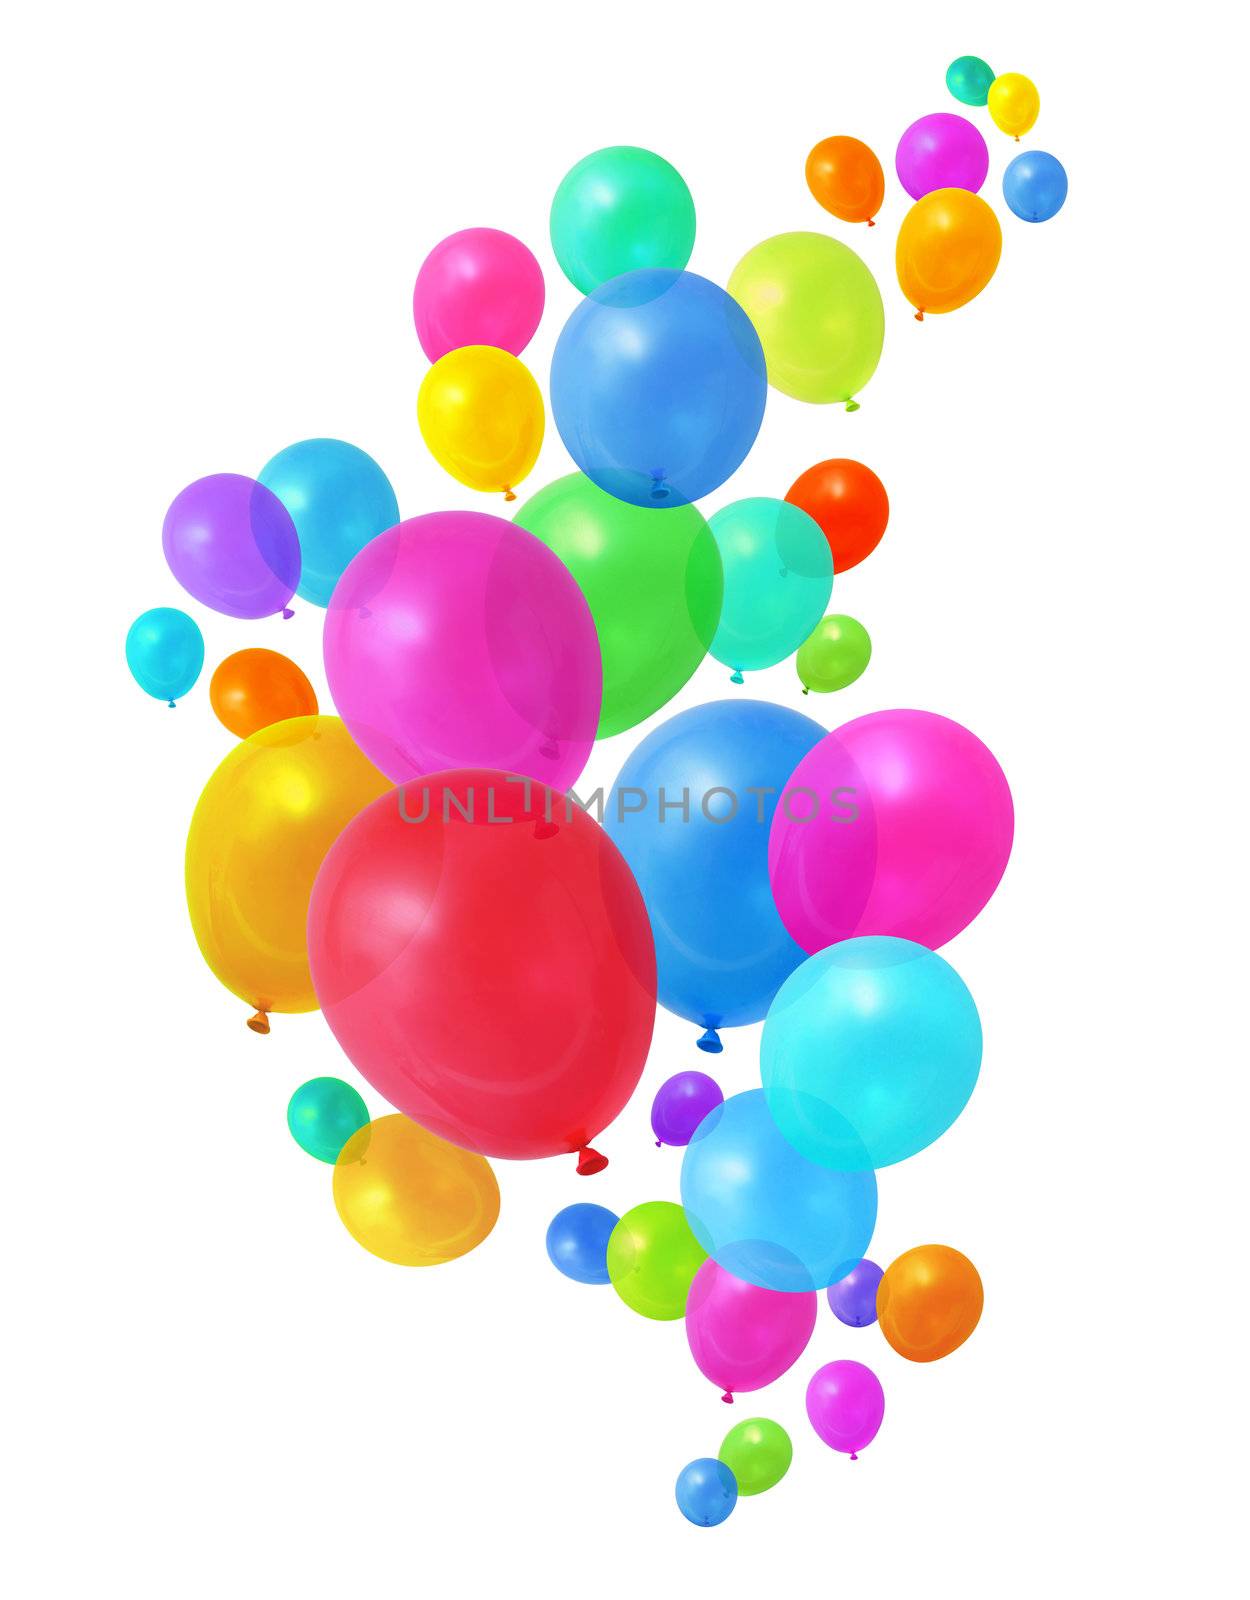 Colorful birthday party balloons flying on white background